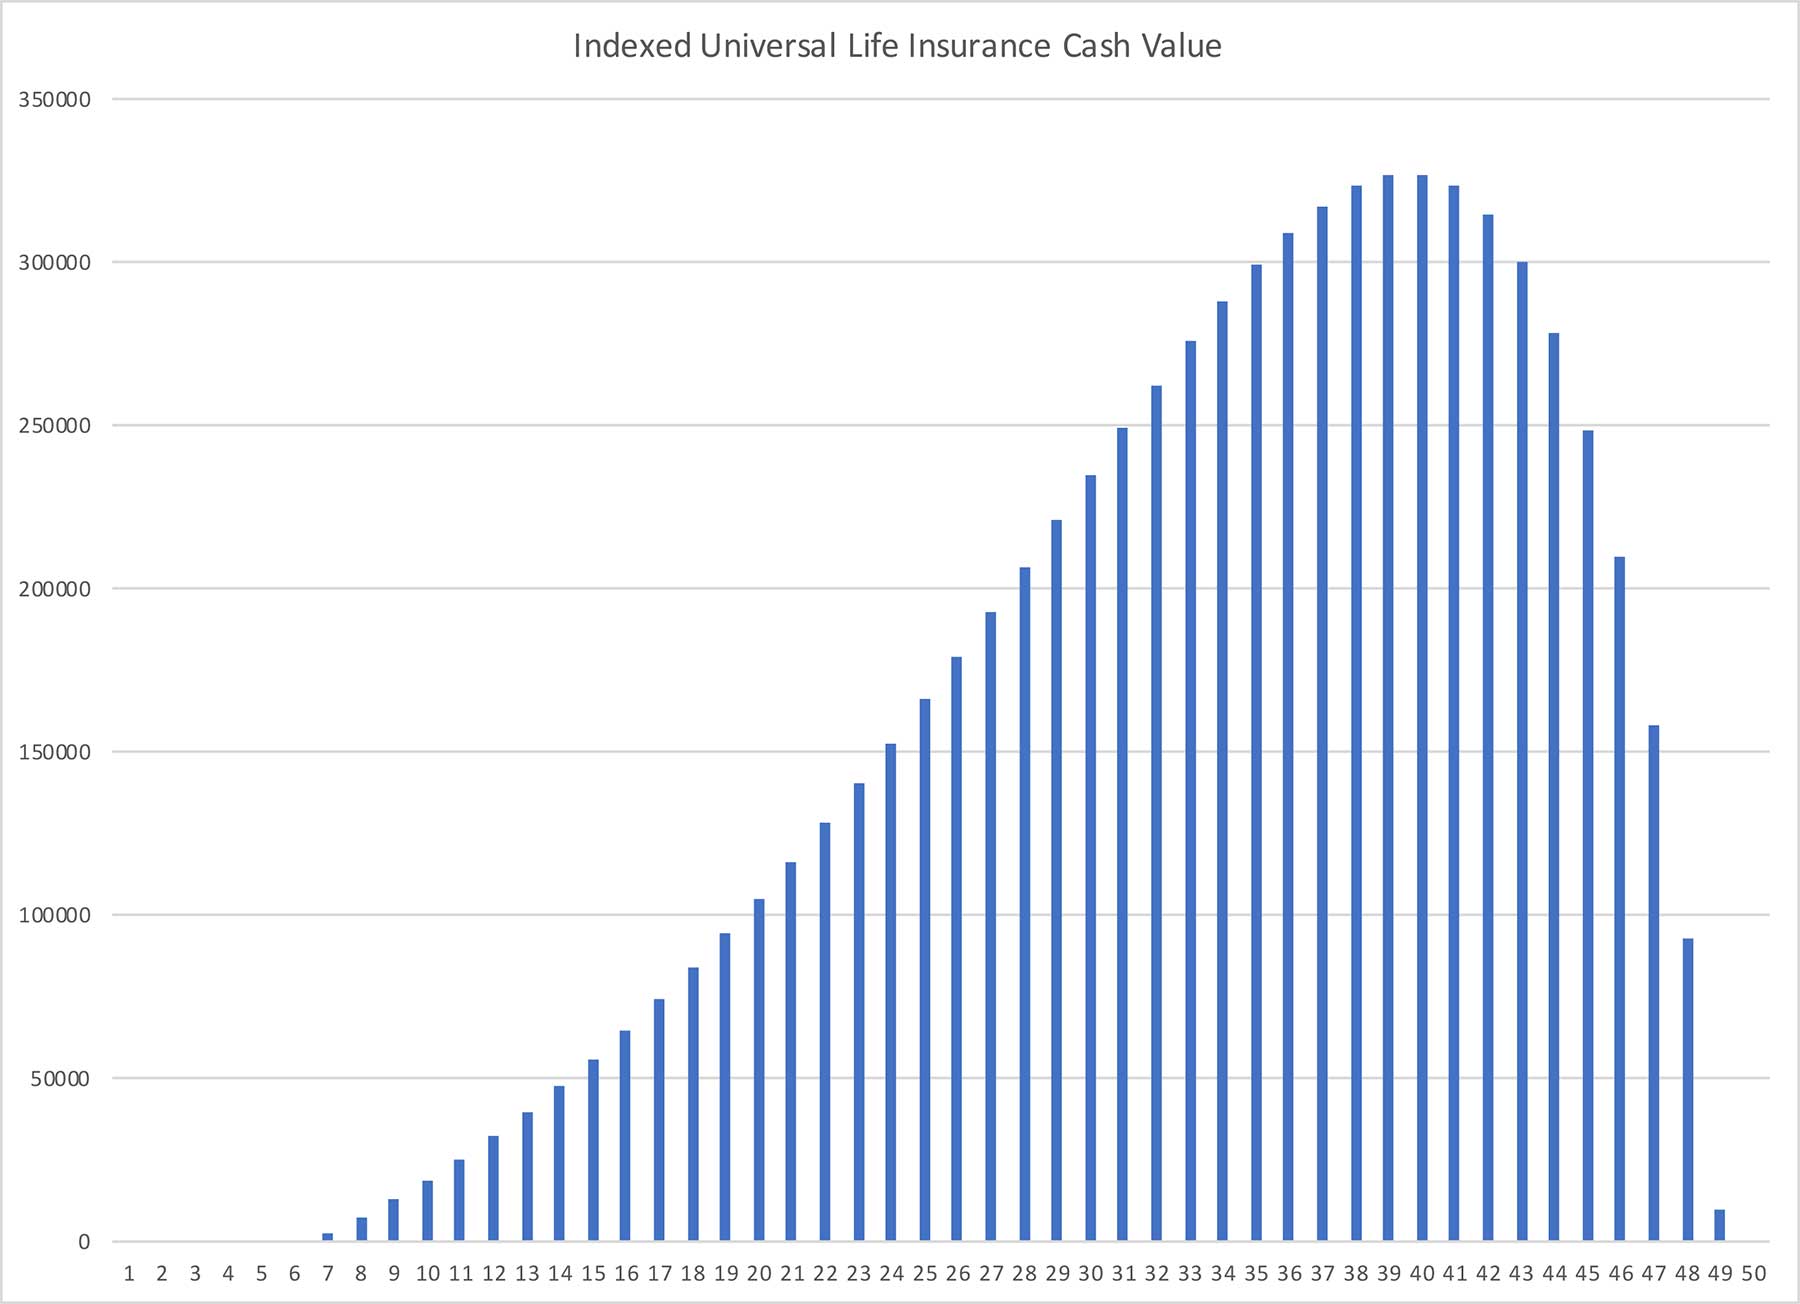 Rising cost indexed universal life insurance